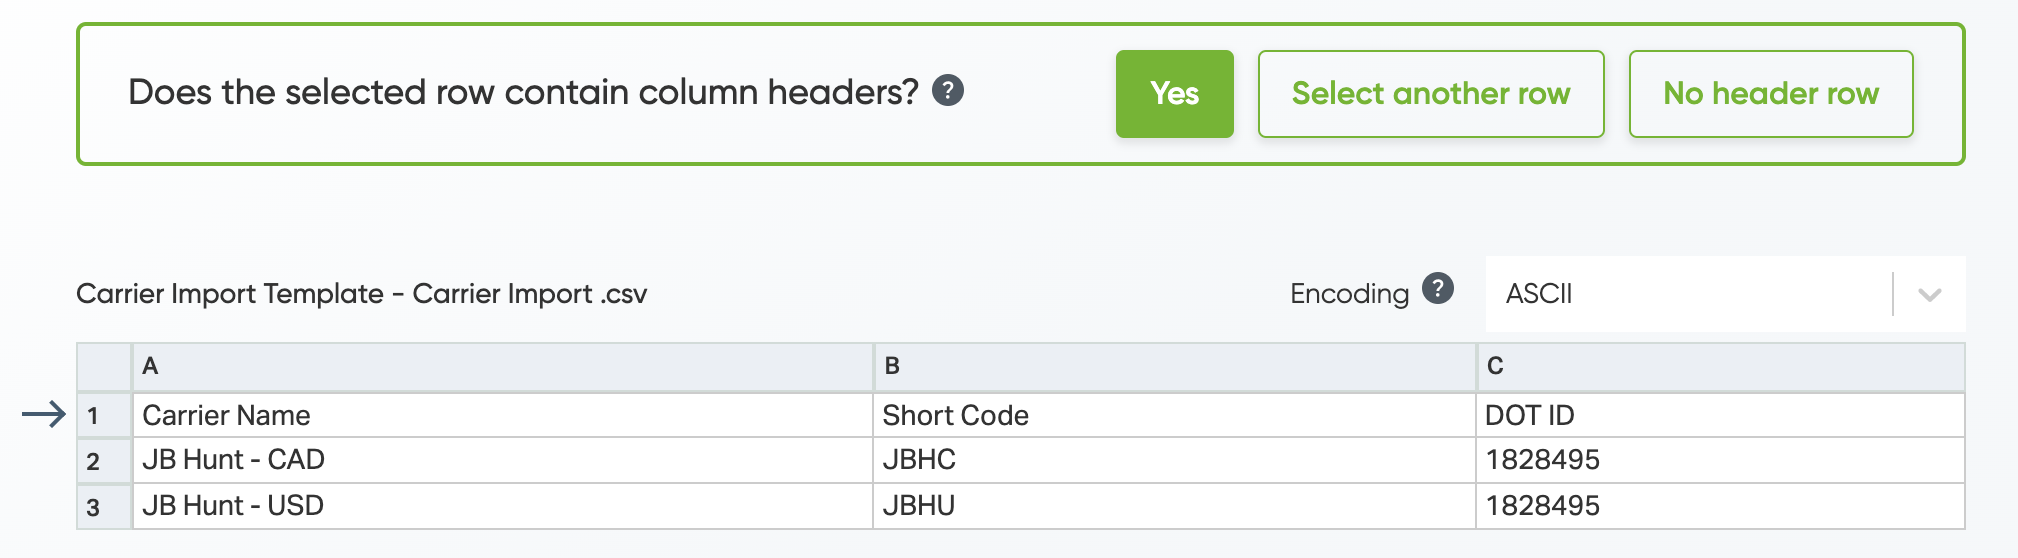 Confirm if the selected row contain column headers.